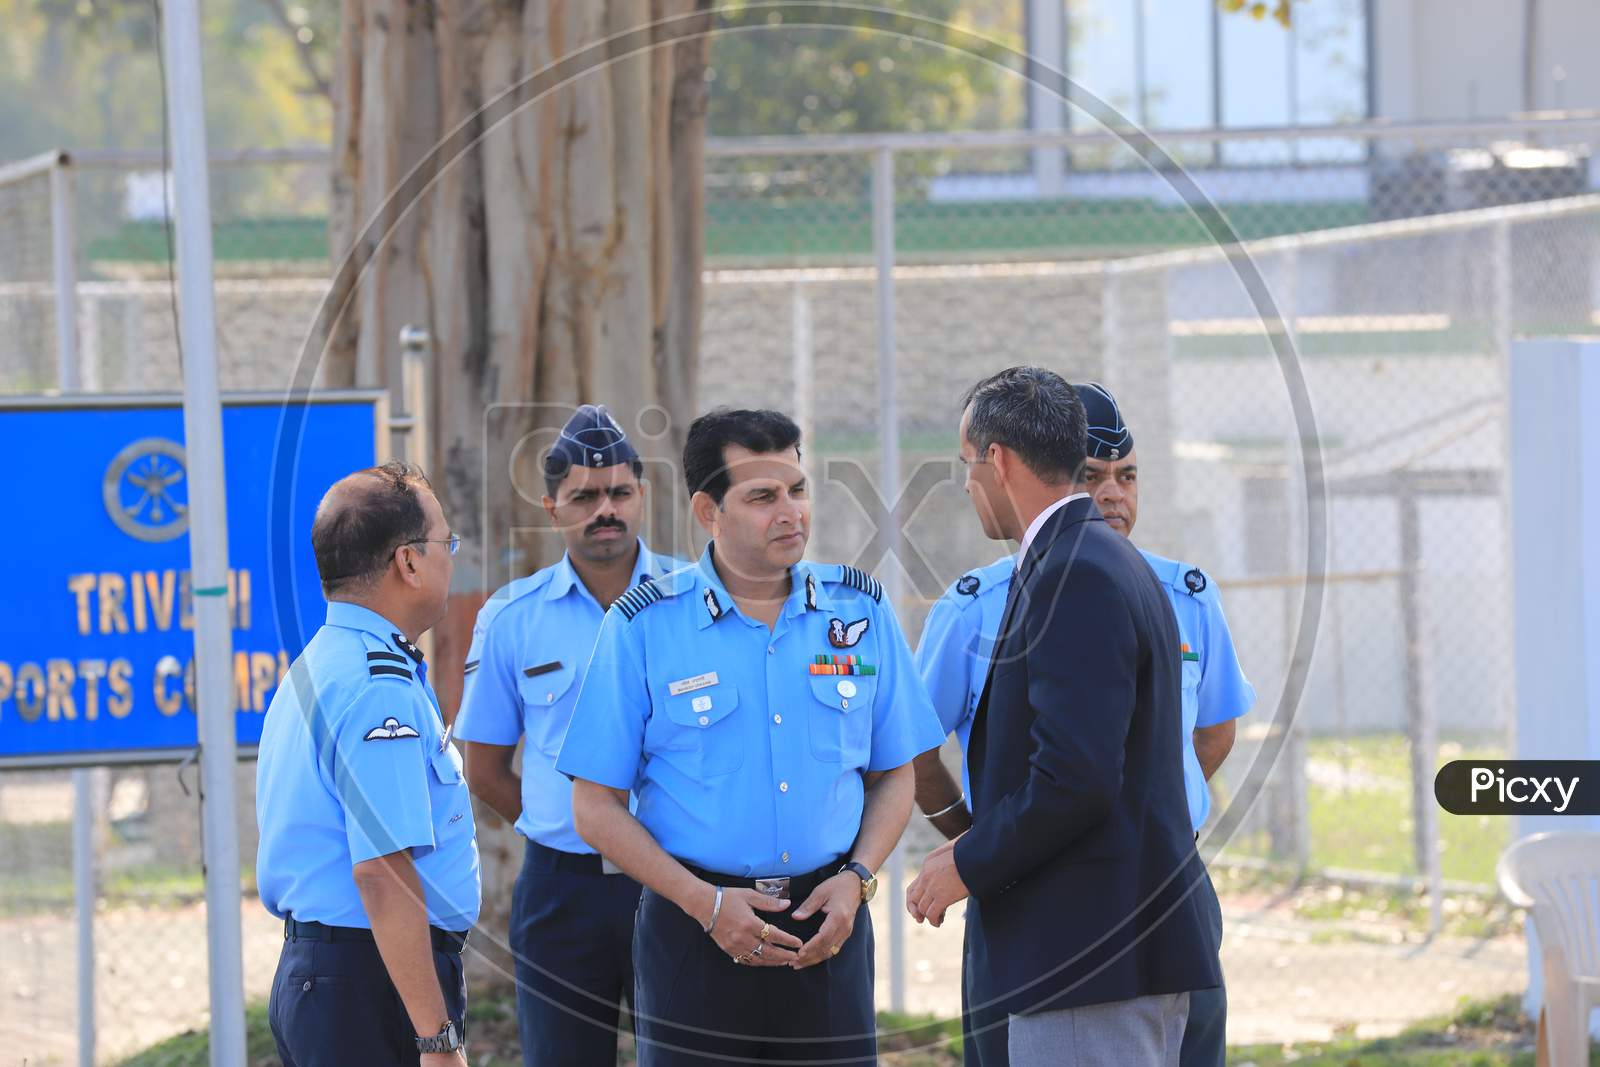 Indian Air Force Officers Assembled At an Air Base